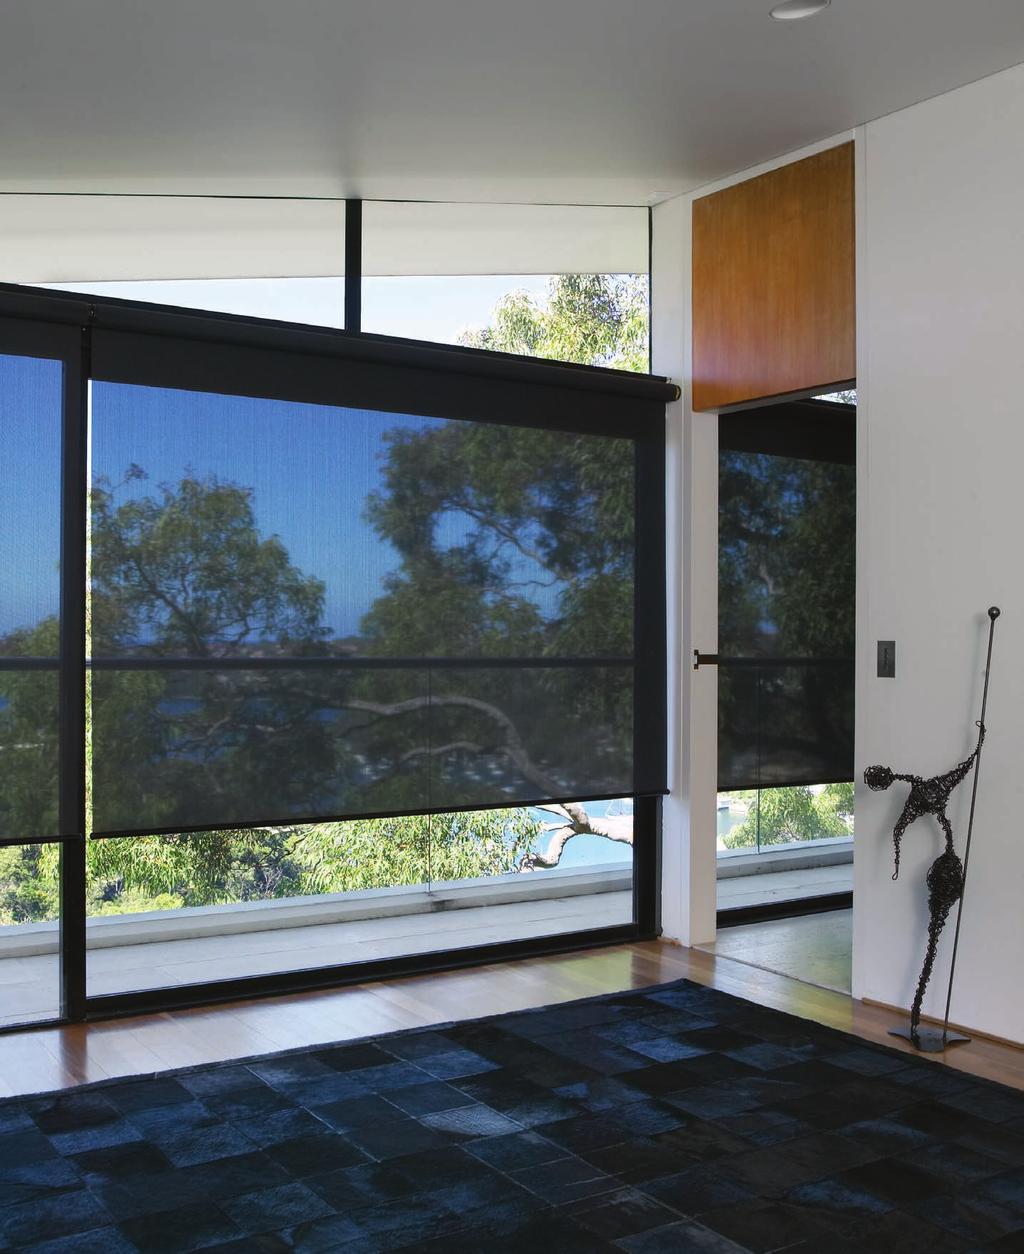 Blinds Verosol blinds come with a 5 year warranty.